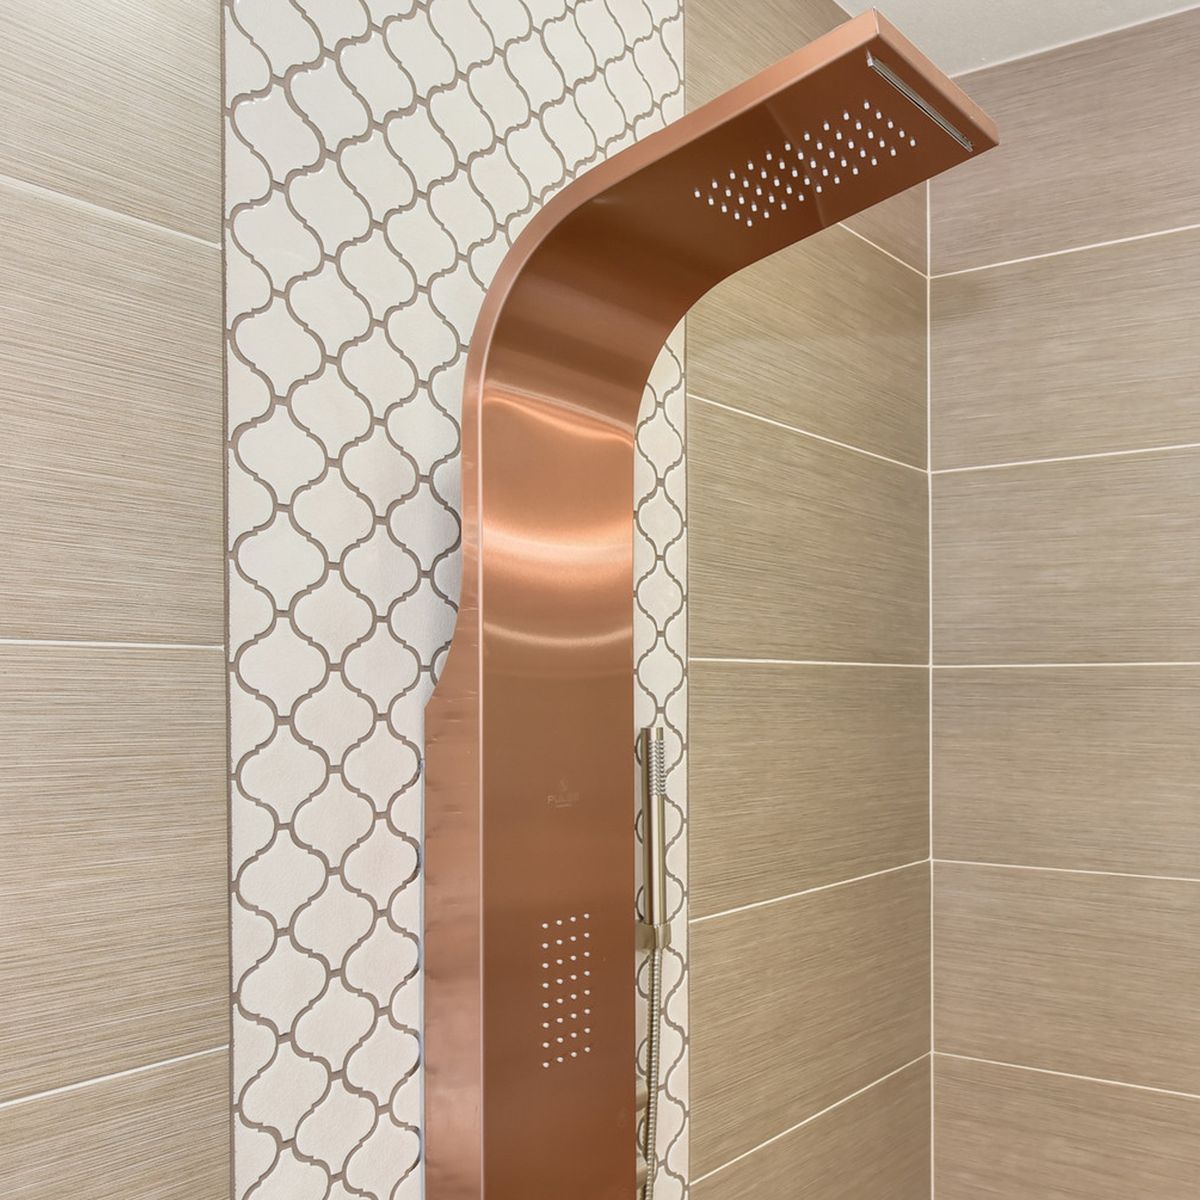 PULSE ShowerSpas Brushed Bronze Stainless Steel Shower Panel - Santa Cruz ShowerSpa - electro-anodized brushed bronze finish - with Oversized body jets, hand shower with double-interlocking stainless steel hose, pressure balance valve and Multiple diverters - 1033 - Vital Hydrotherapy